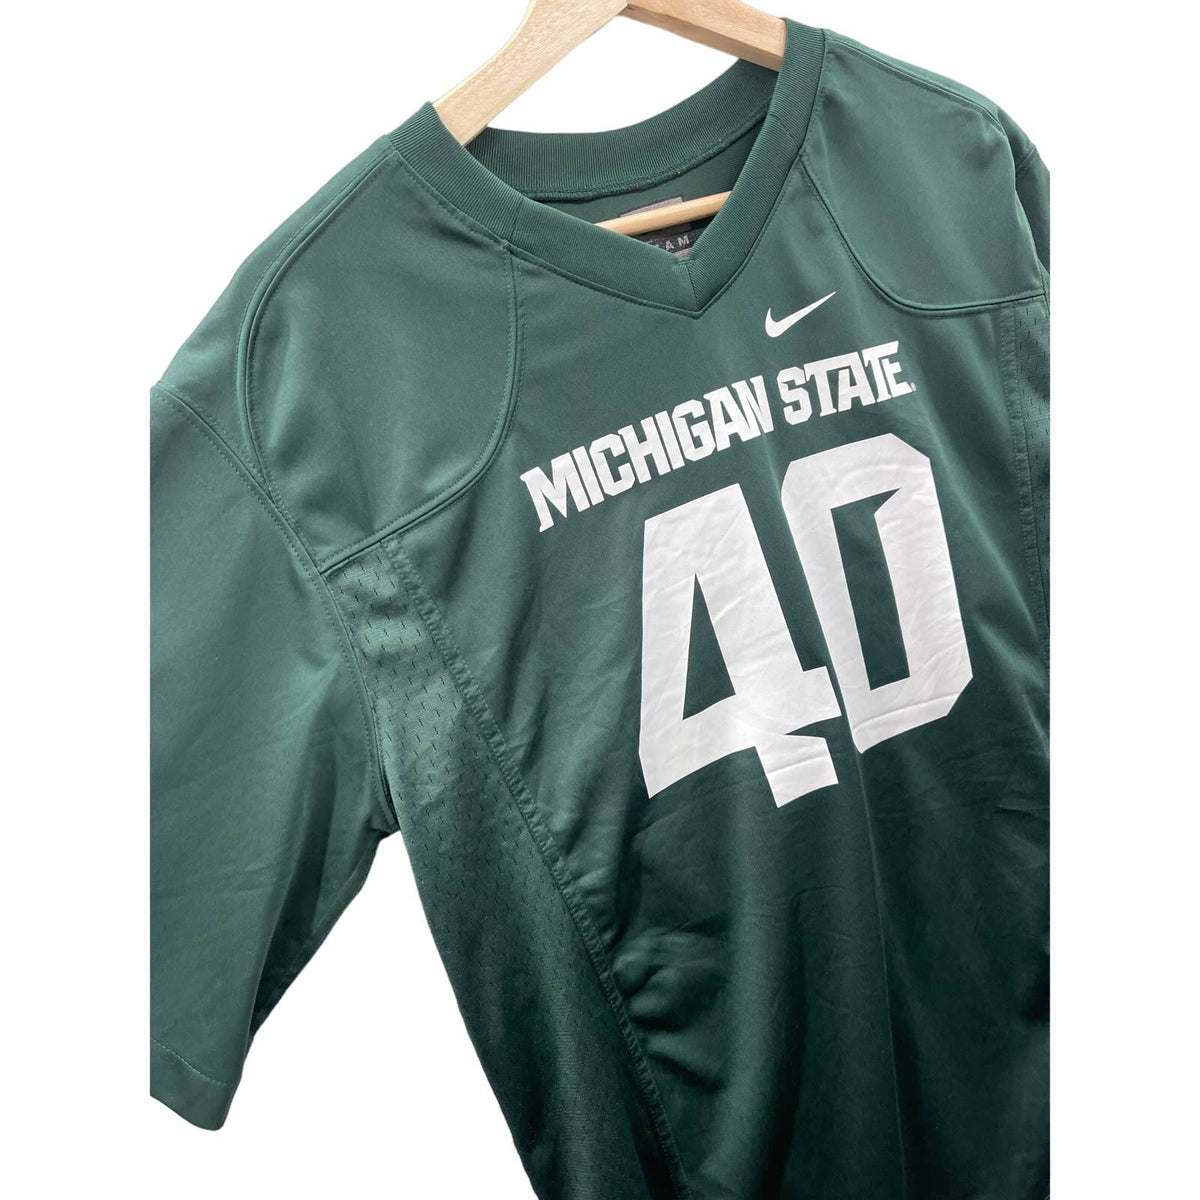 Vintage Nike Michigan State #40 Youth College Football Team Jersey